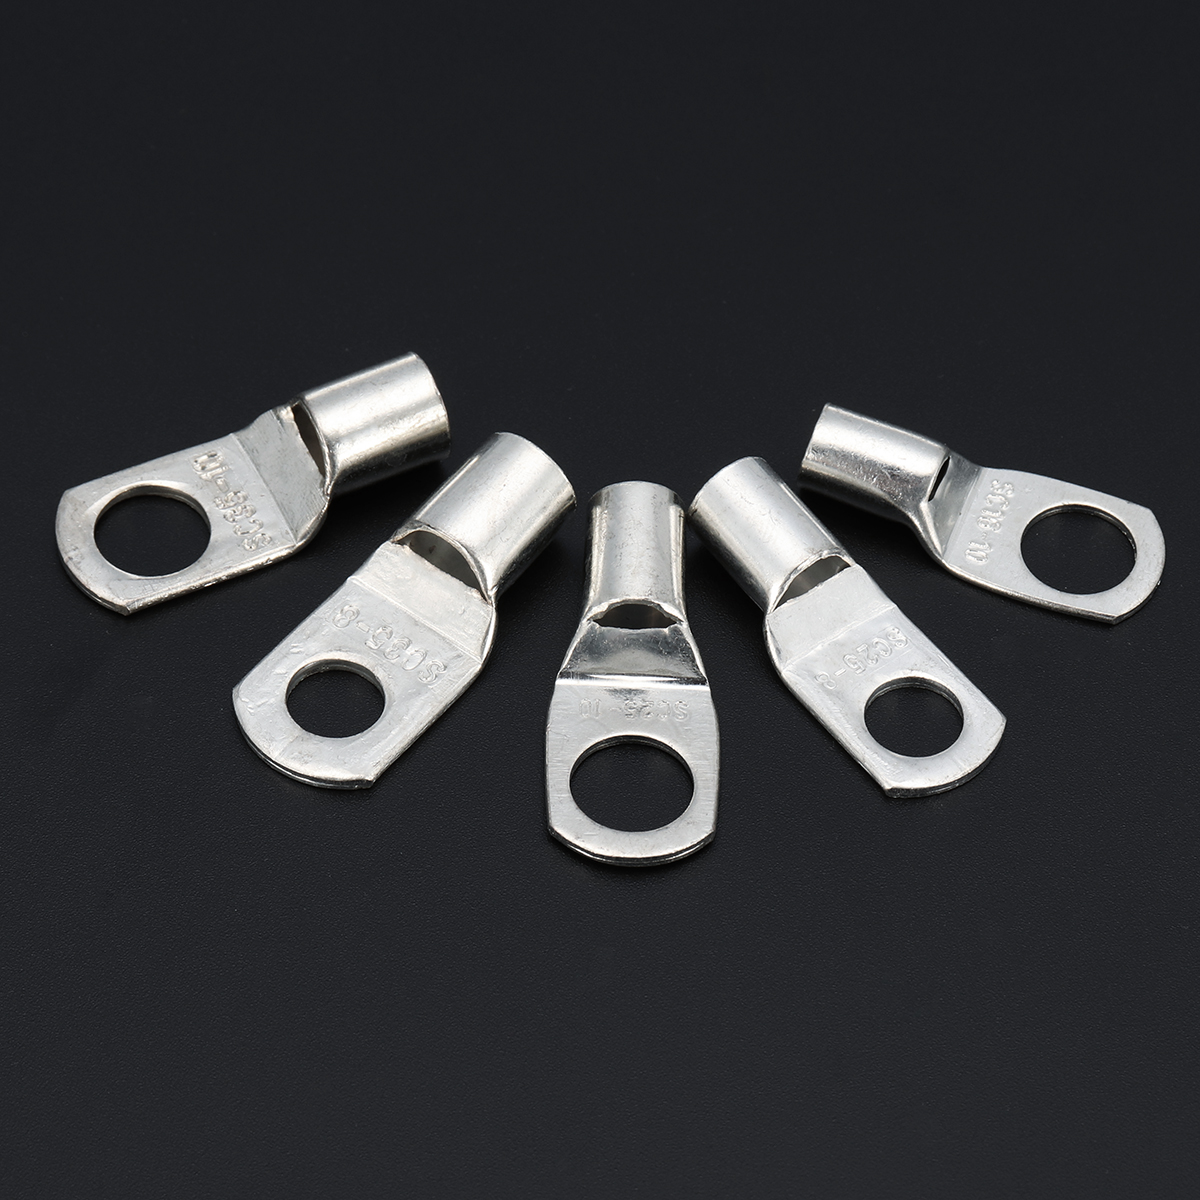 Excellway-90-Pc-Tinned-Copper-Terminals-Cable-Terminals-Connector-Cable-lugs-Battery-SC-Terminals-1335898-6